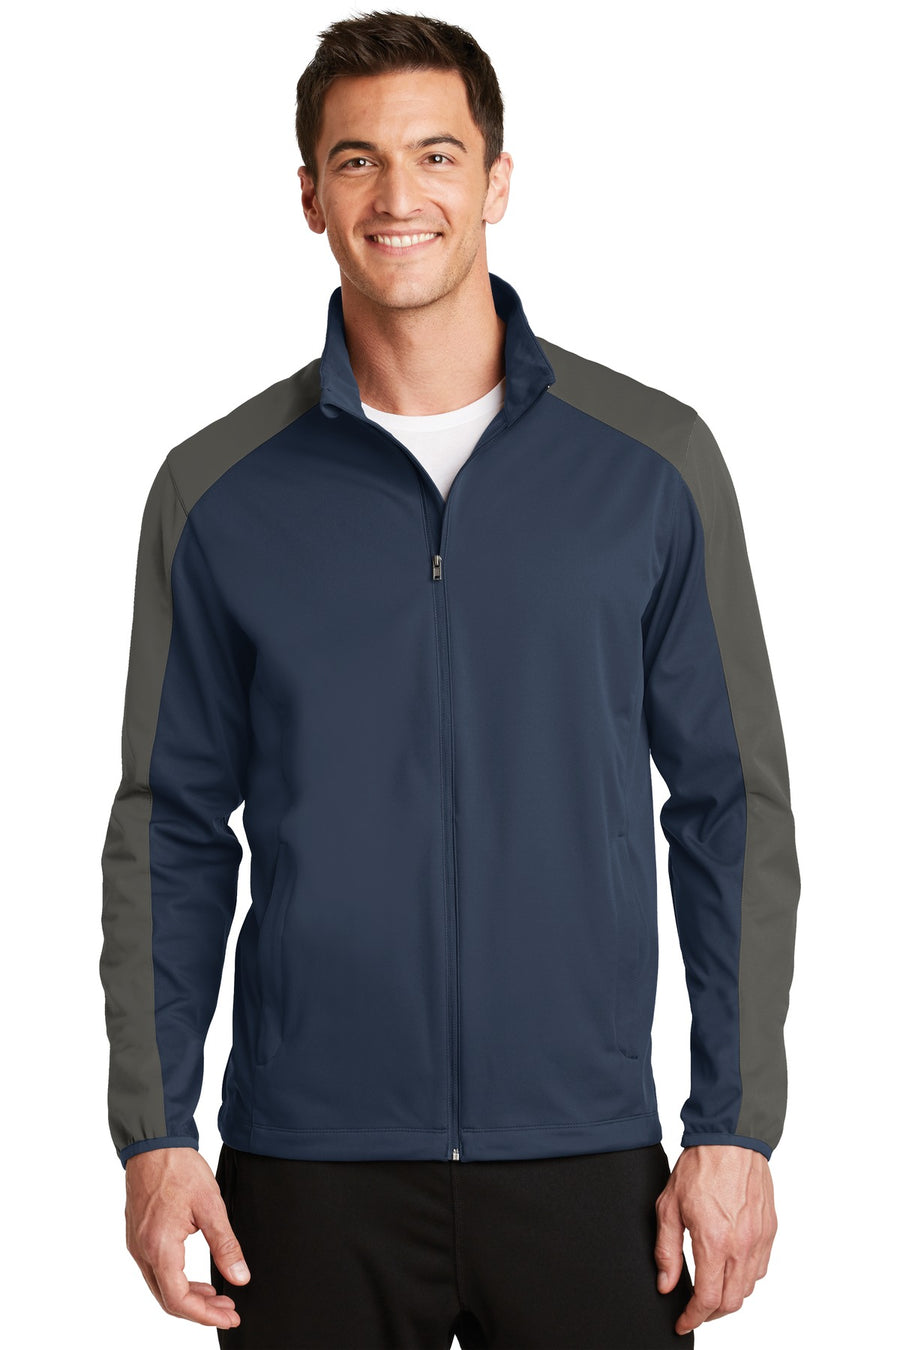 Port Authority Active Colorblock Soft Shell Jacket.